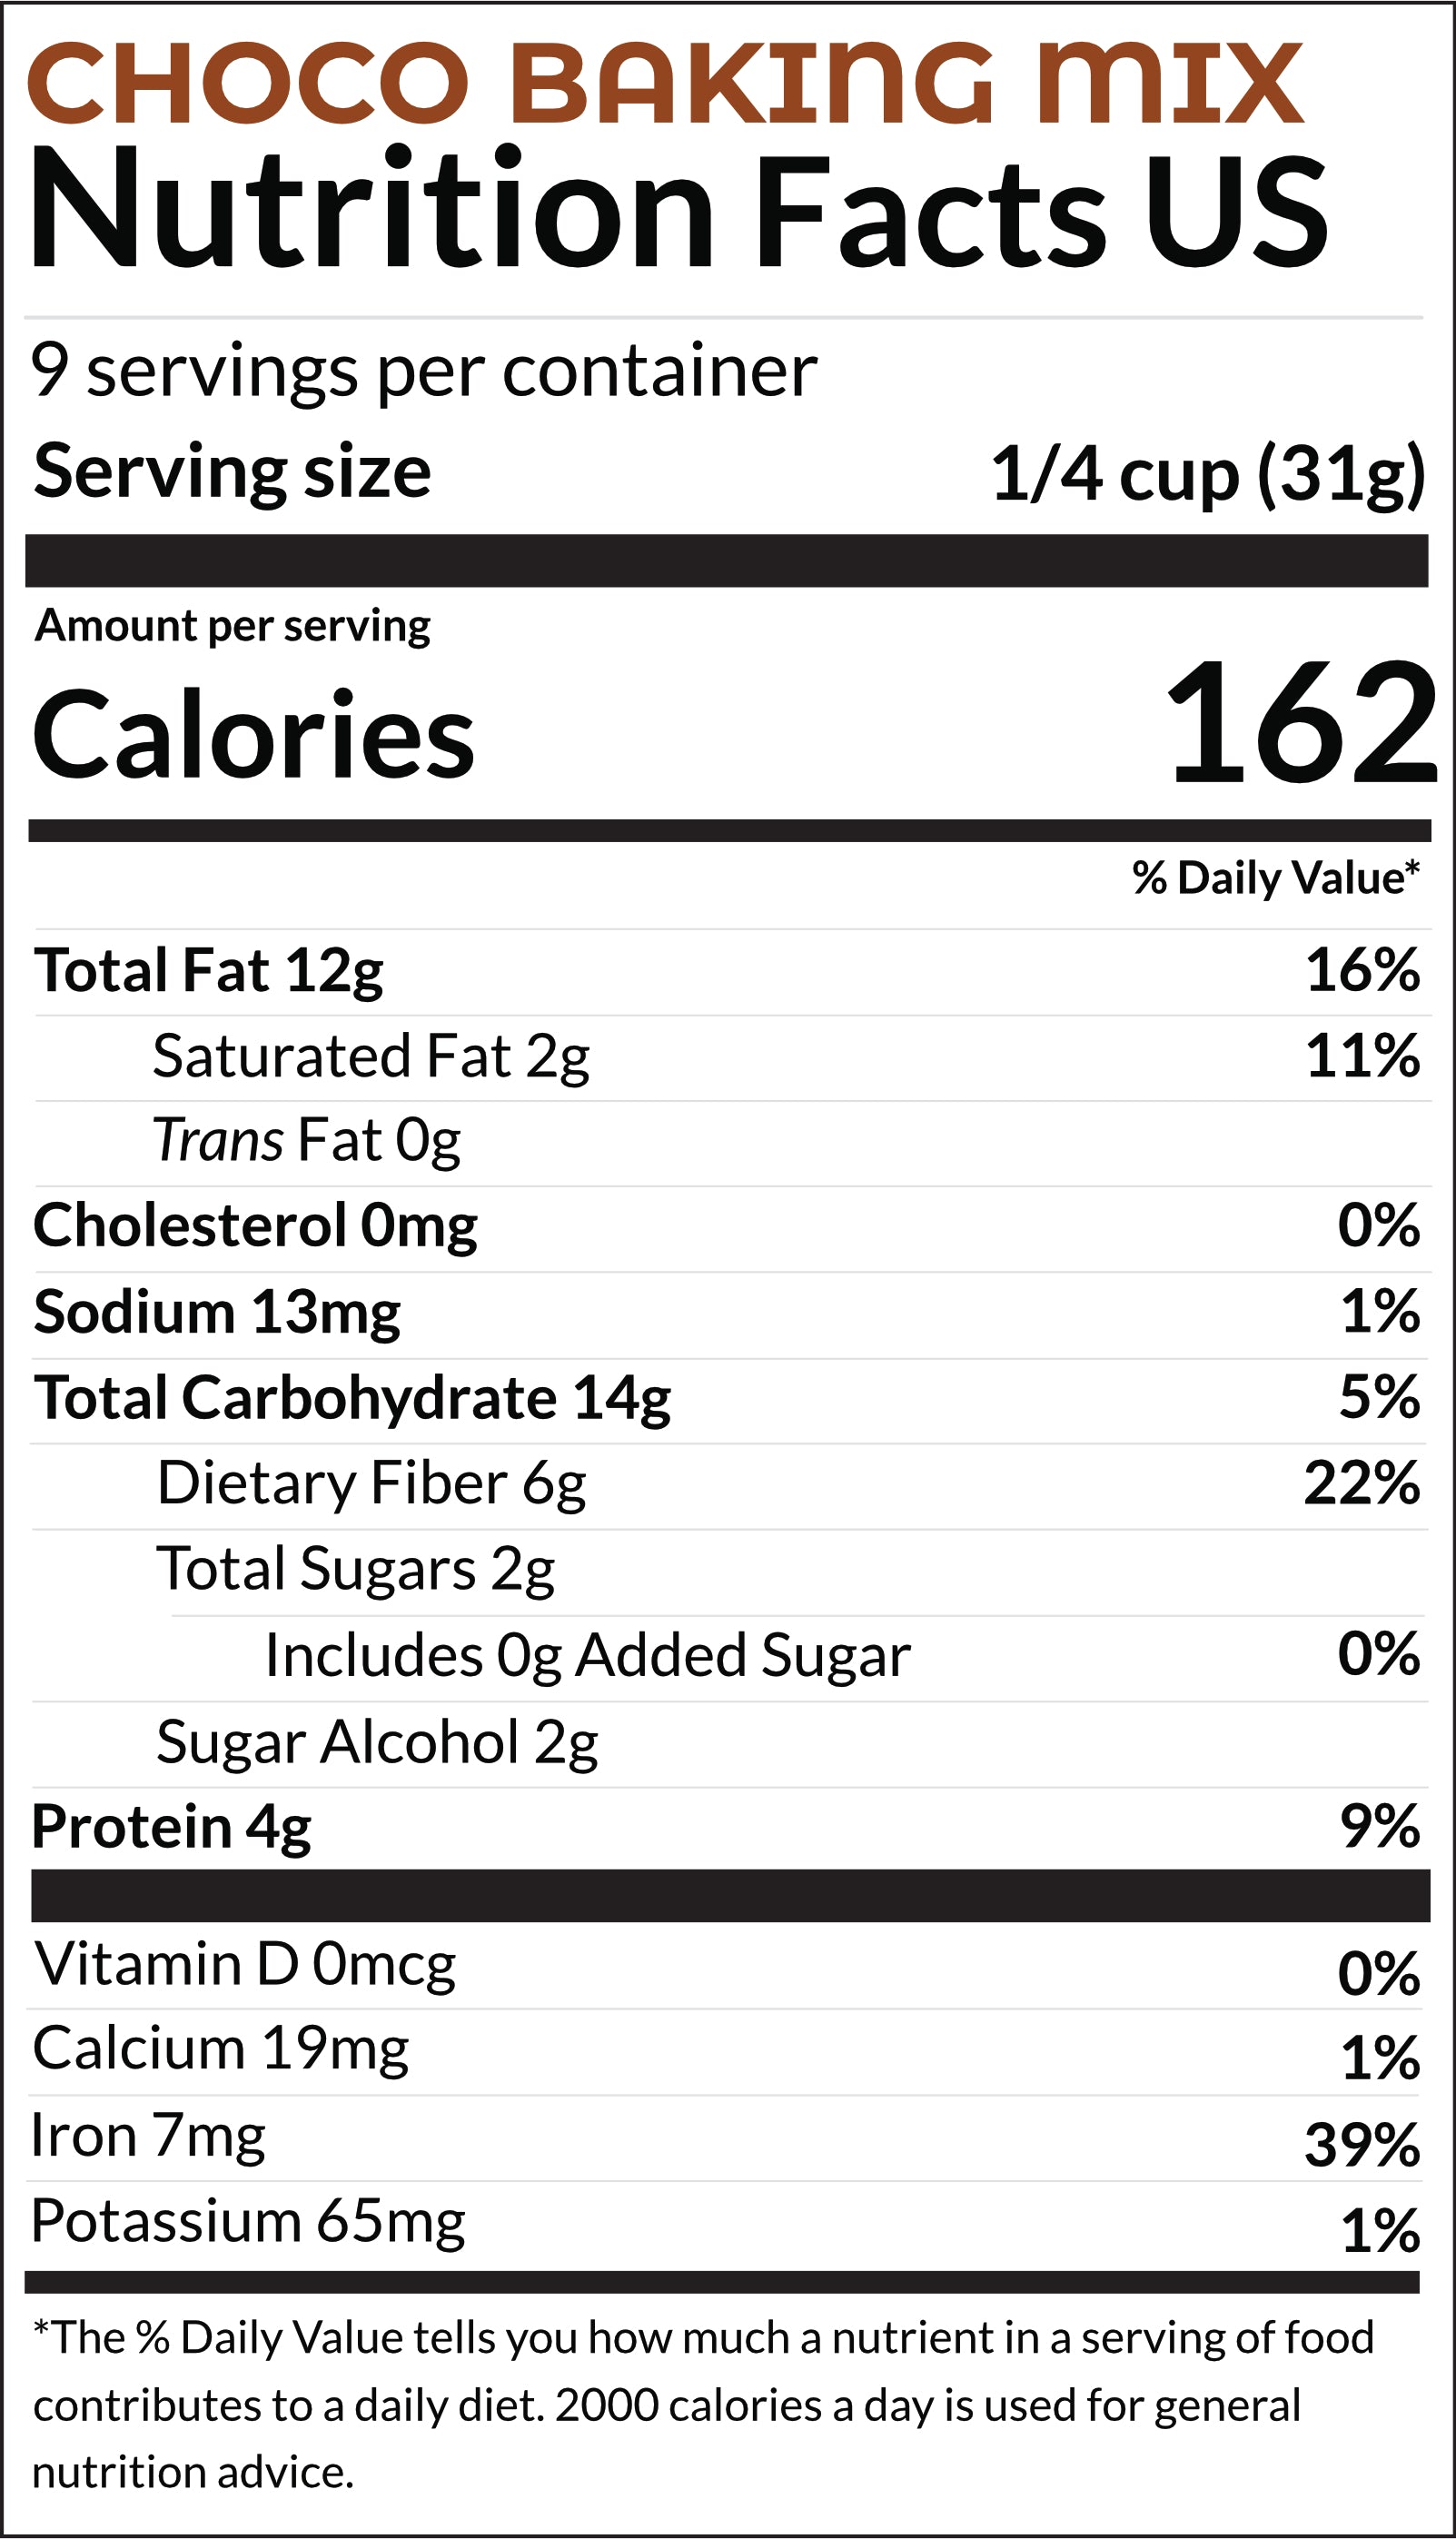 US nutritional information choco baking mix